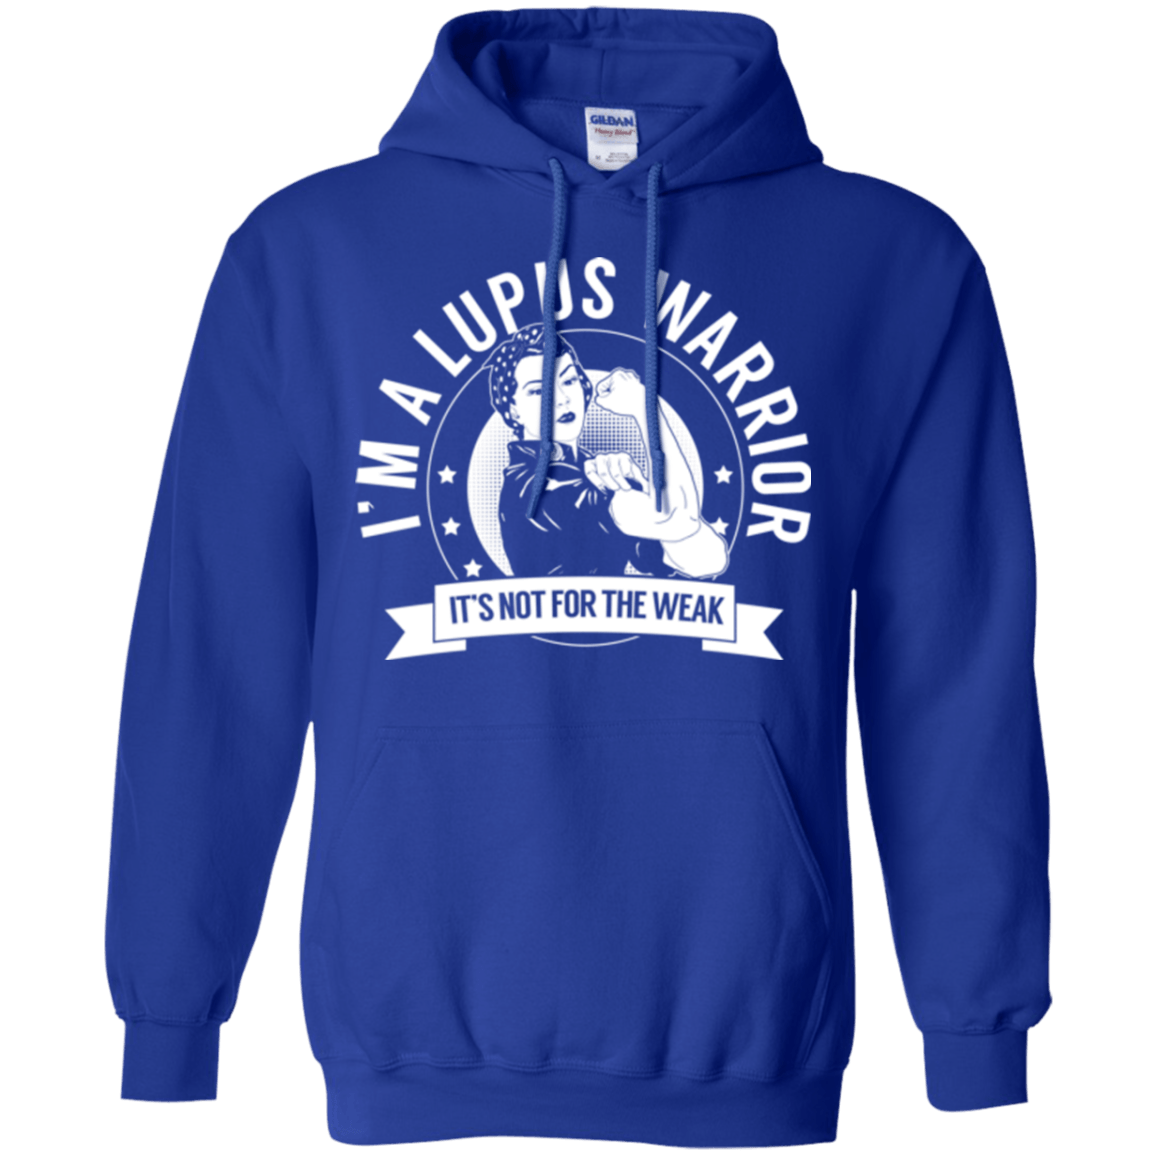 Lupus Warrior Not For The Weak Pullover Hoodie 8 oz. - The Unchargeables